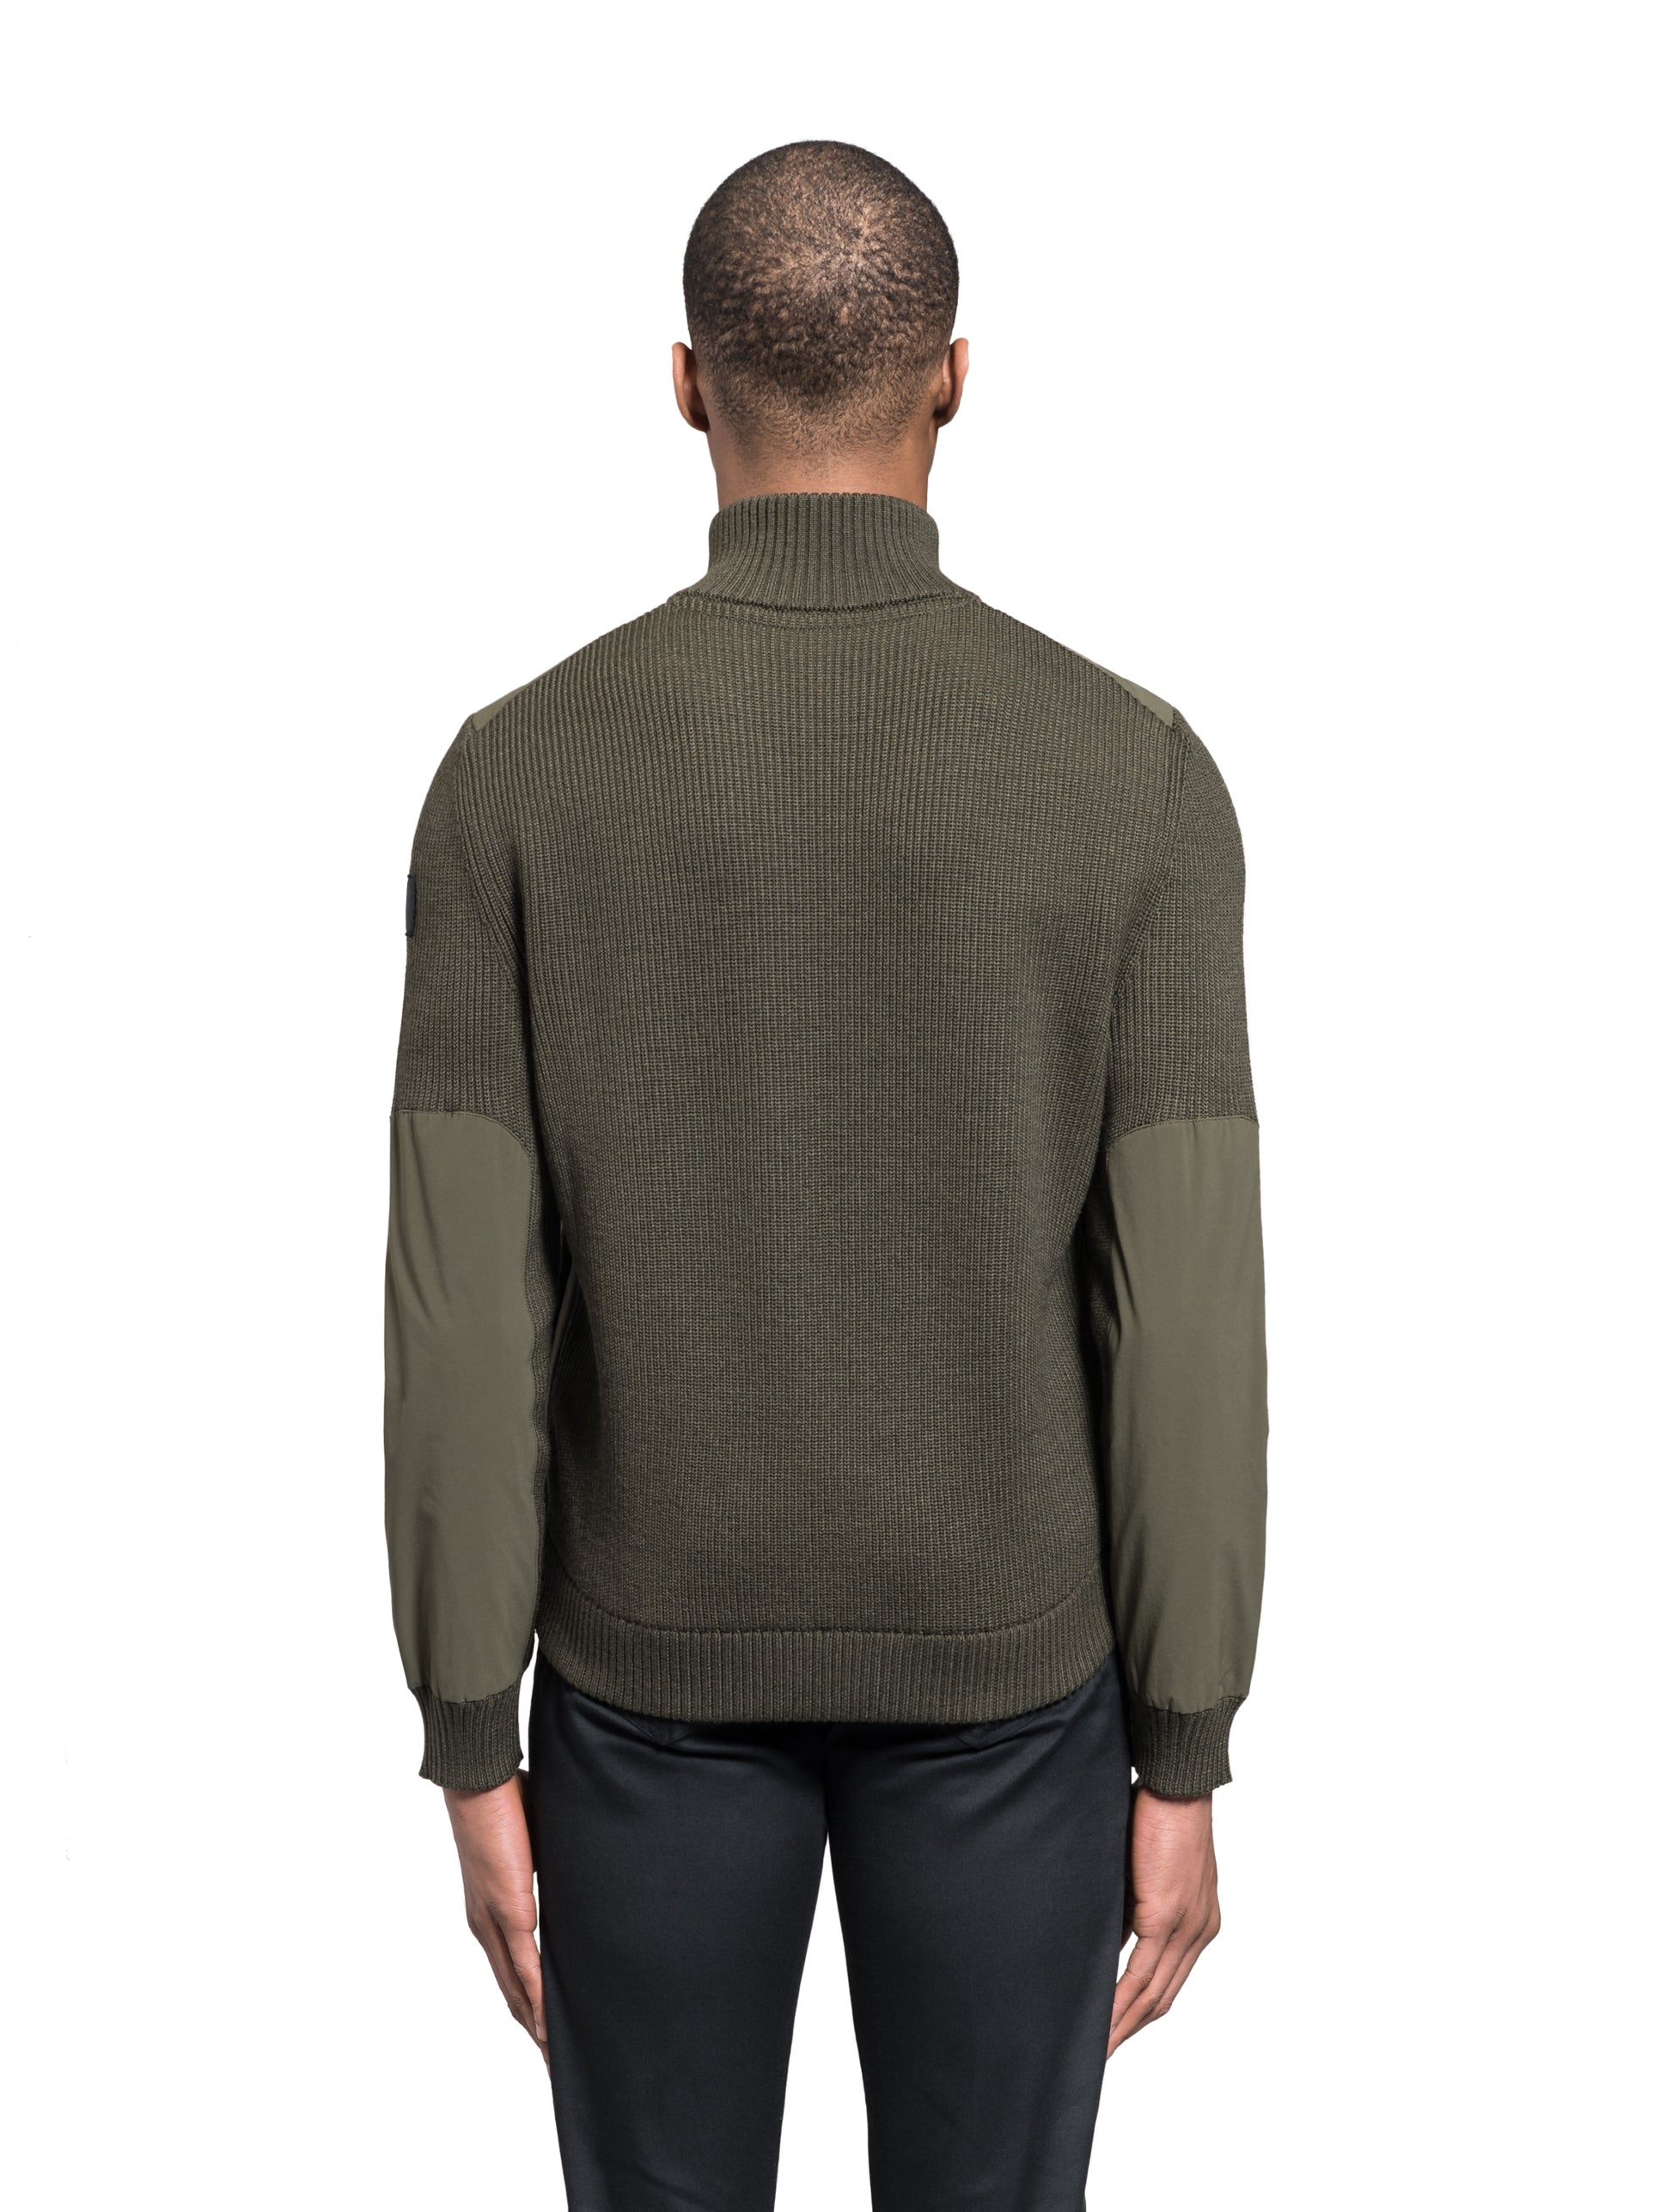 Ero Men's Tailored Hybrid Sweater in hip length, PrimaLoft Gold Insulation Active+, Durable 4-Way Stretch Weave quilted torso, Merino wool knit collar, sleeves, back, and cuffs, two-way front zipper, and hidden waist pockets, in Fatigue